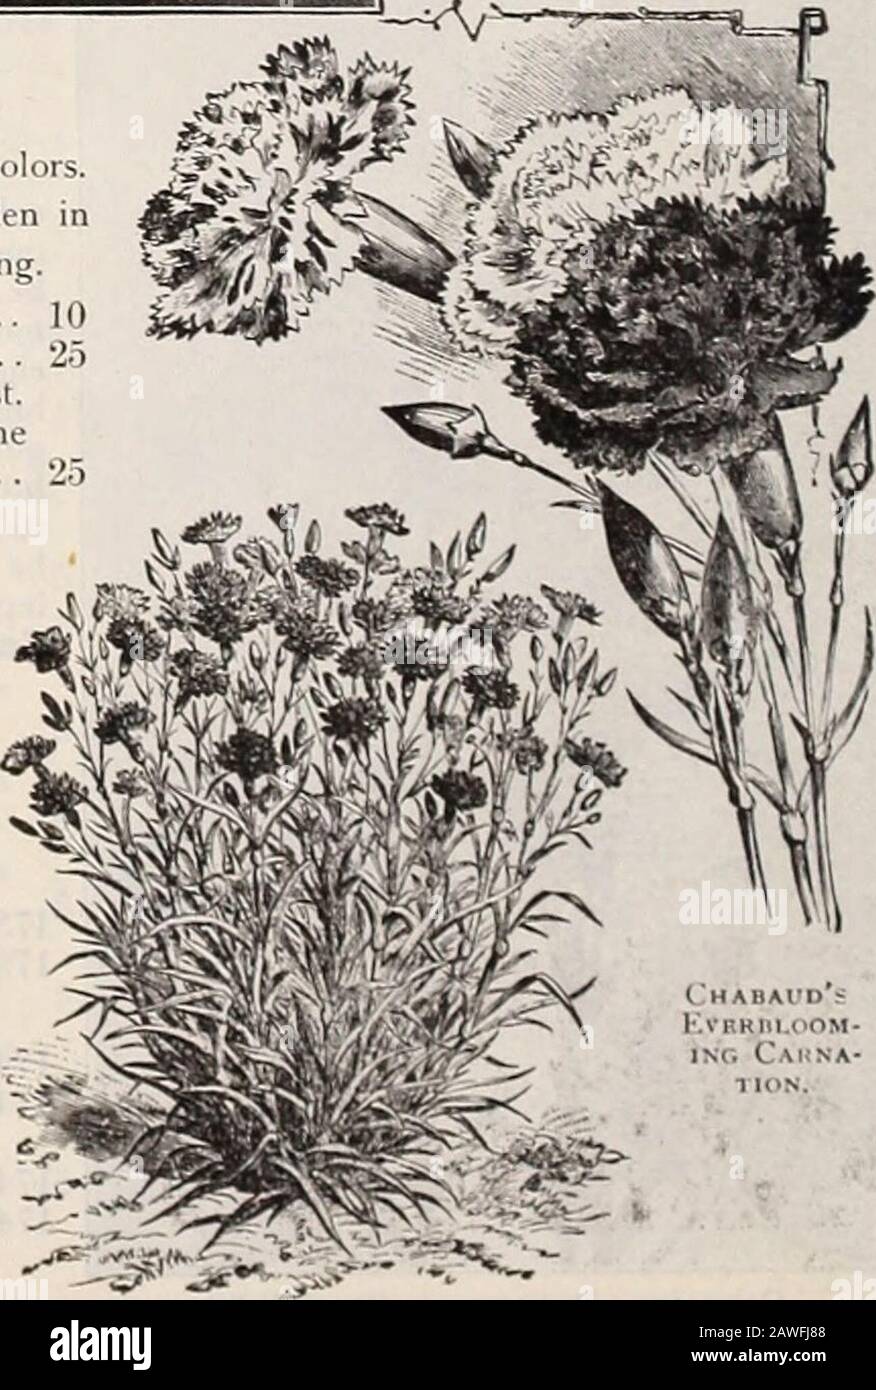 Dreer's 72nd annual edition garden book : 1910 . oz.. 40 cts r, GIANT MARGUERITE CARNATION. 1830 An improved strain, producing flowers of immense size, frequentlymeasuring 21 to 3 inches across. Strong, vigorous growers, andwonderfully free-flowering; mixed colors. J oz., 50 cts 10. i yon want the very beit in Alters, get those offered •&gt; page 55. IIINRTADREER^^HILADELPHIAPAm RELIABLE PLOWERSEfDS Stock Photo